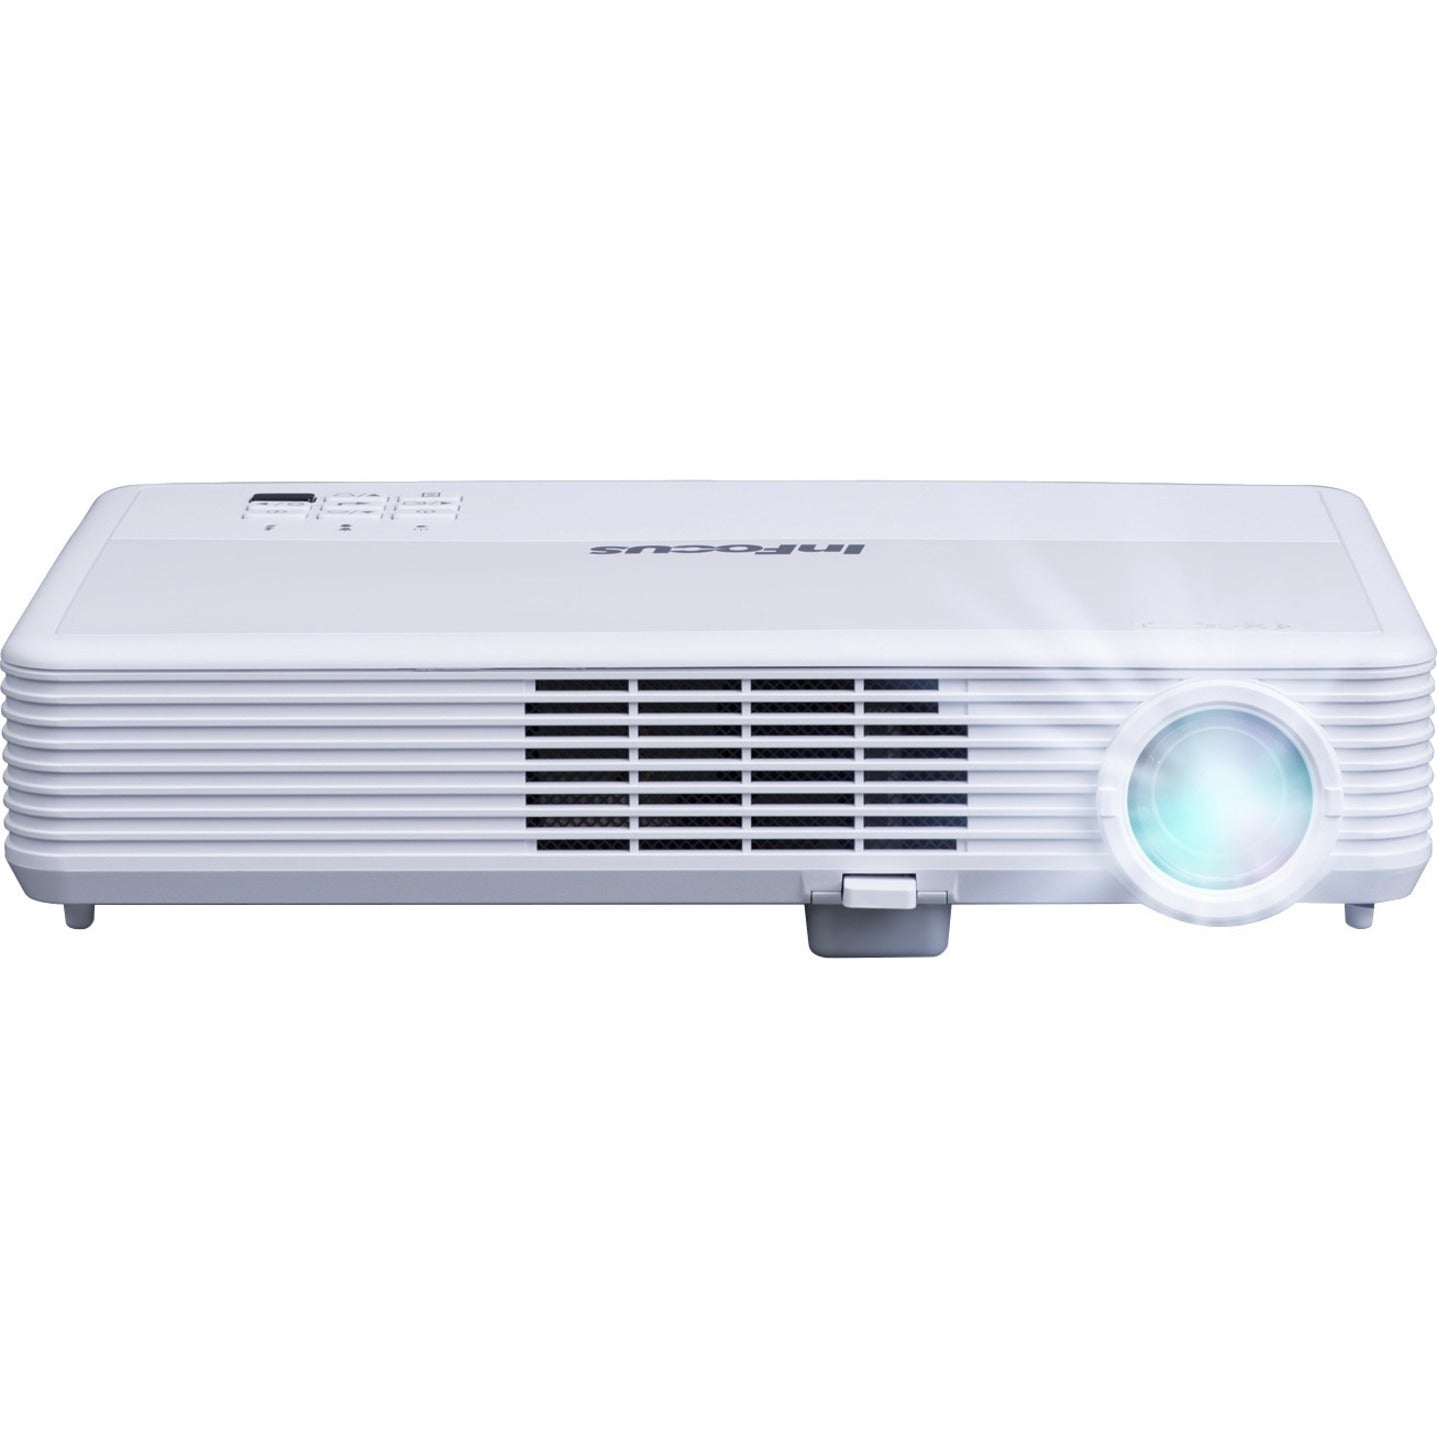 InFocus IN1156 LED Projector, 3D Ready, WXGA, 3000 lm, 16:10